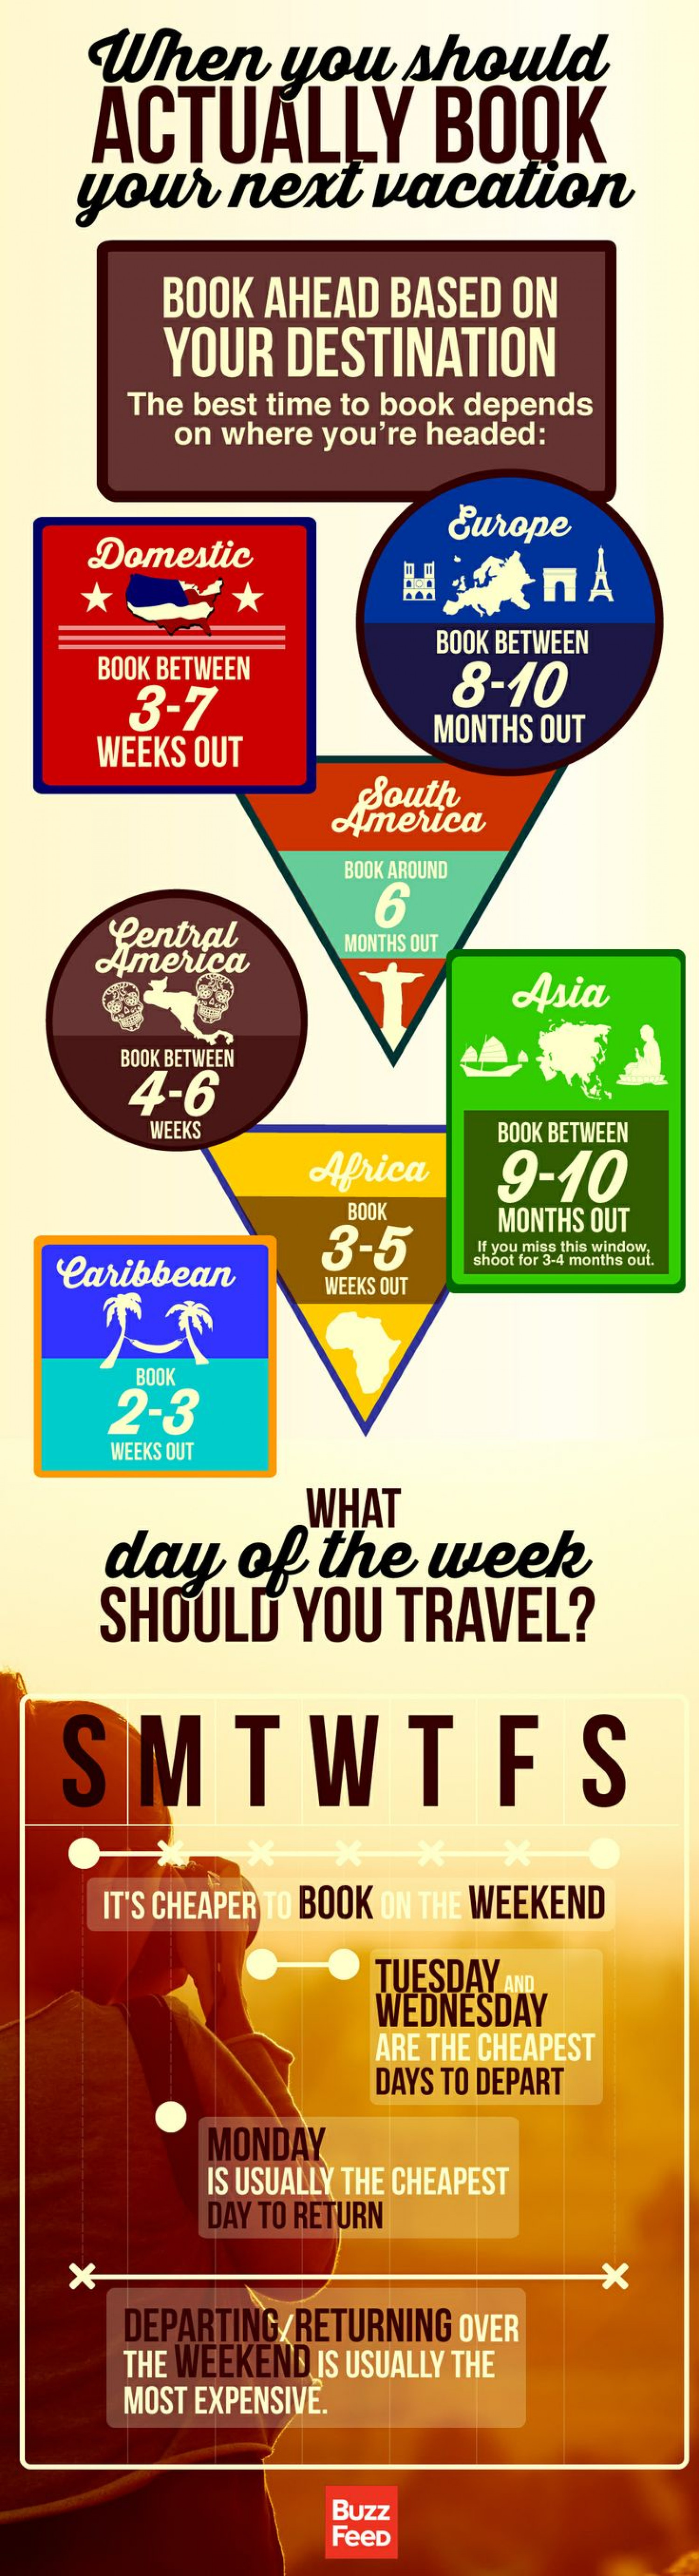 When You Should Actually Book Your Next Vacation Infographic